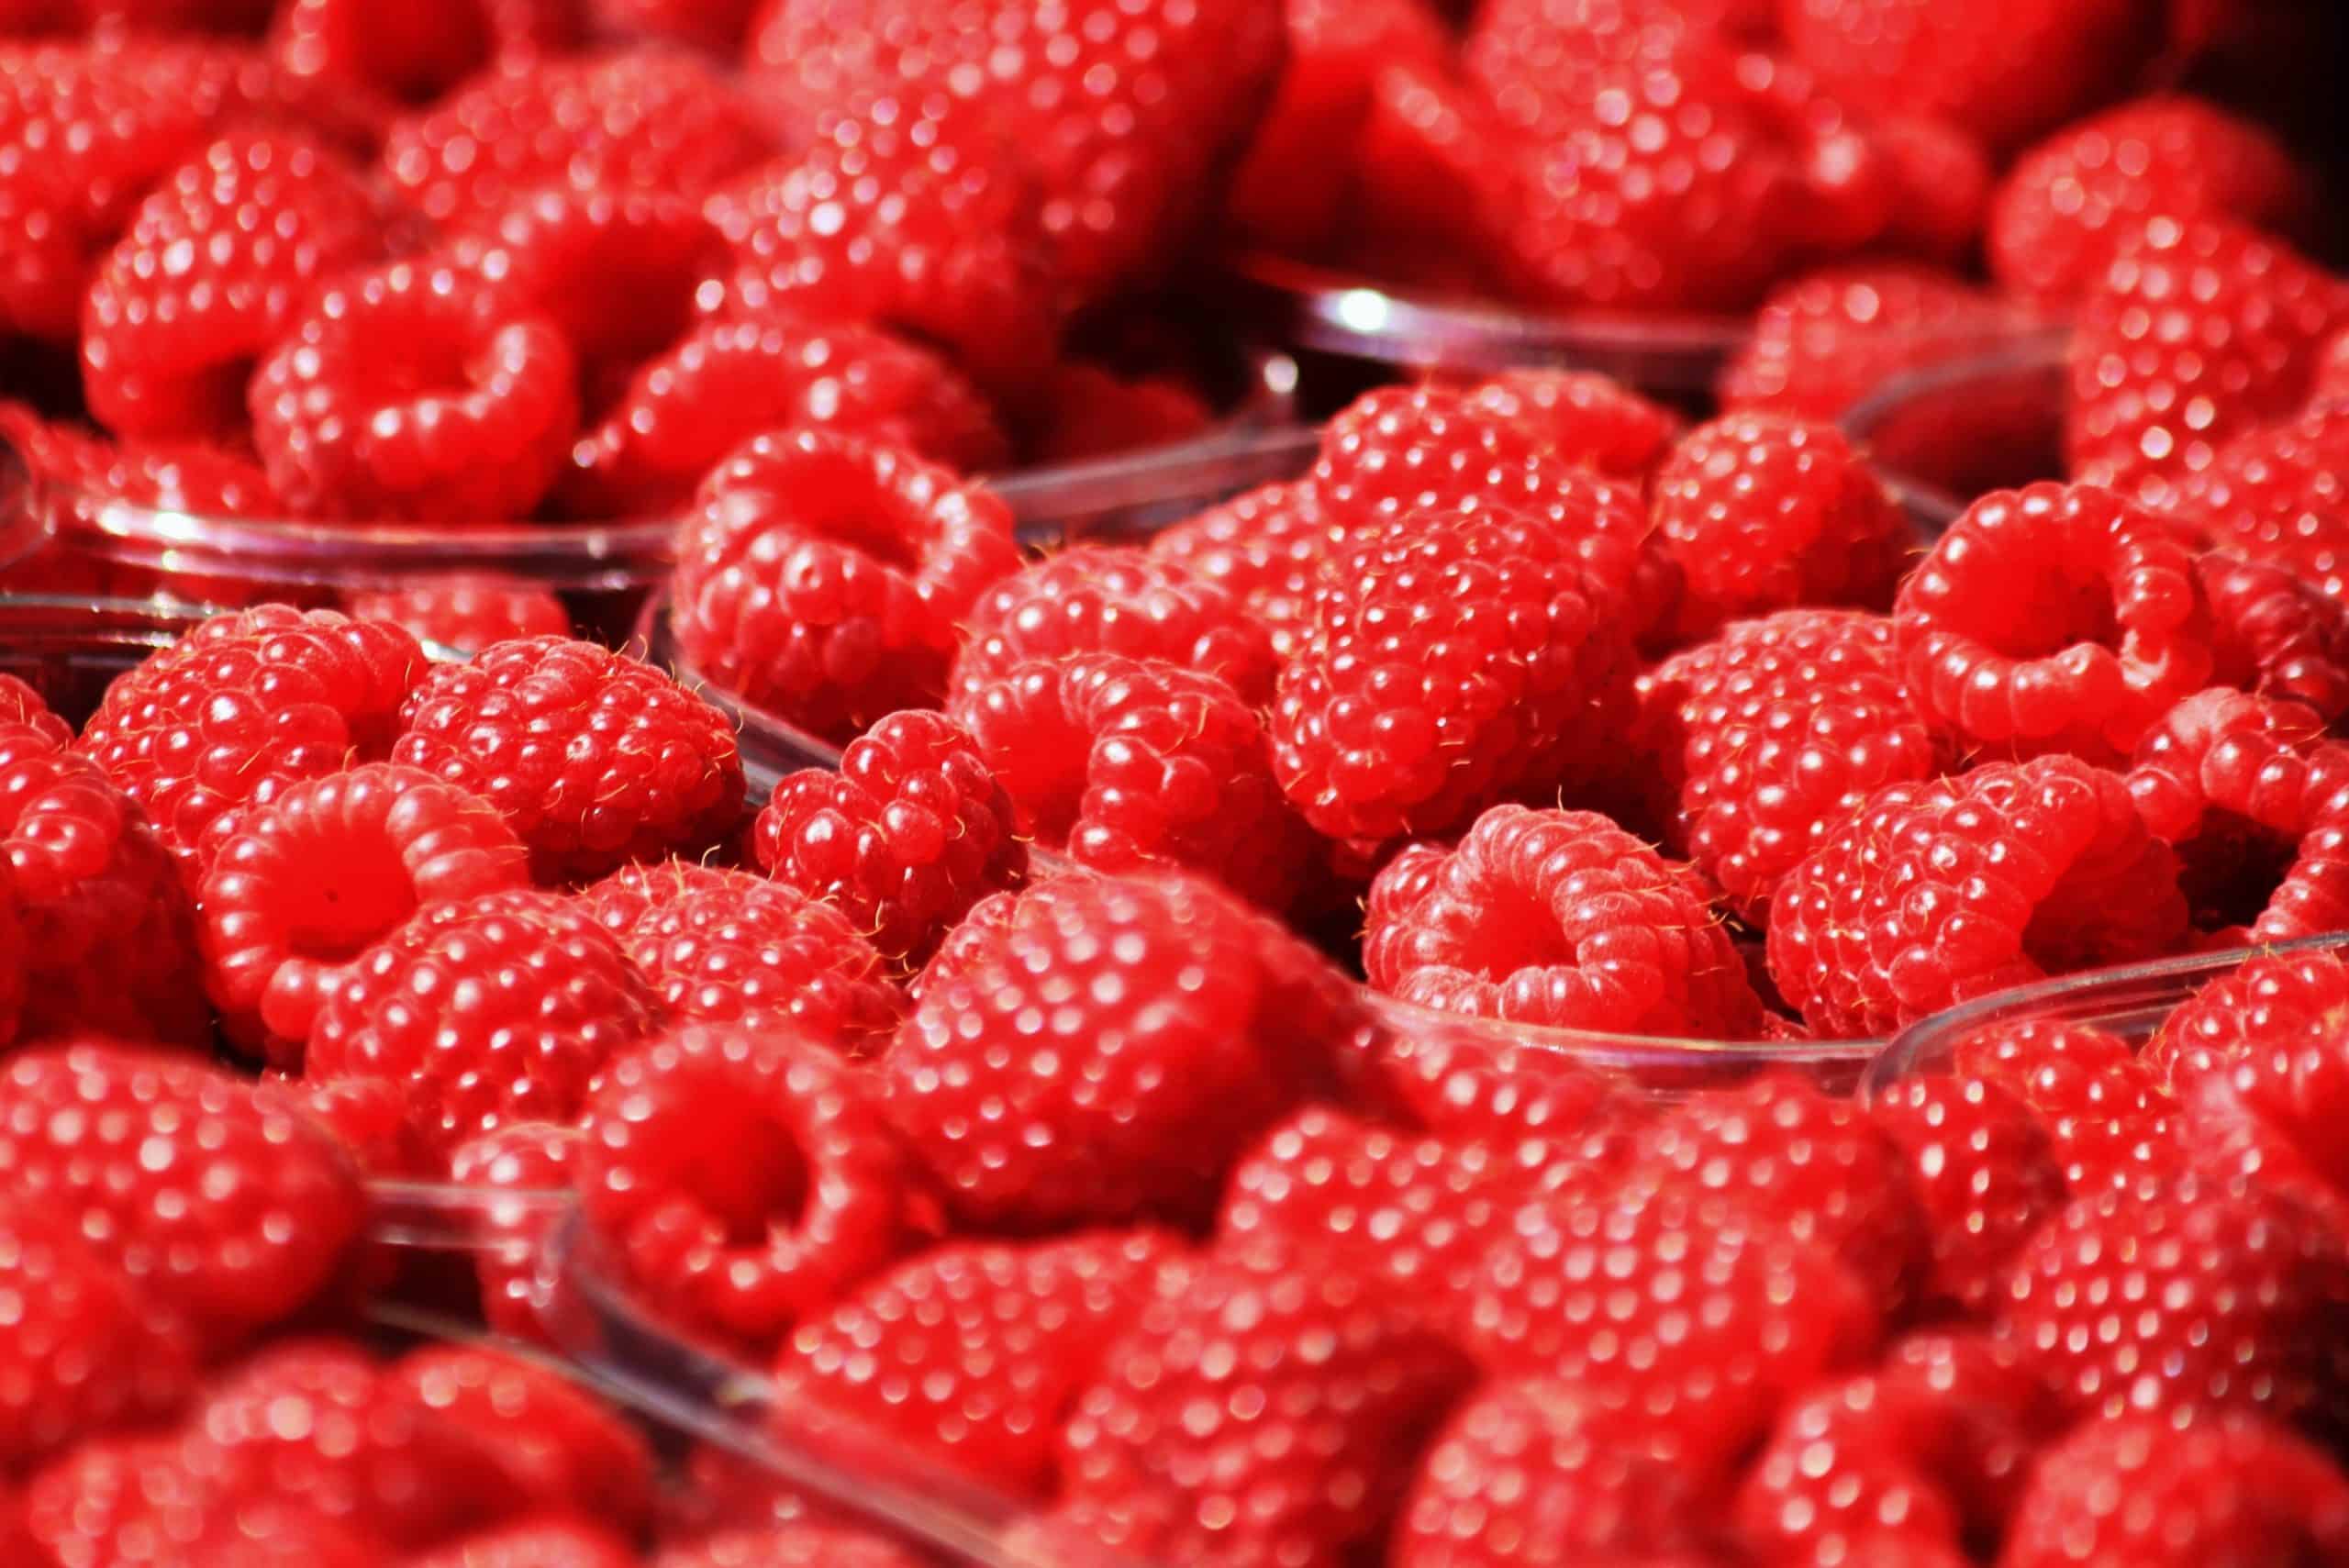 Raspberry farm – who couldn’t find local workers – stripped bare after free fruit offer